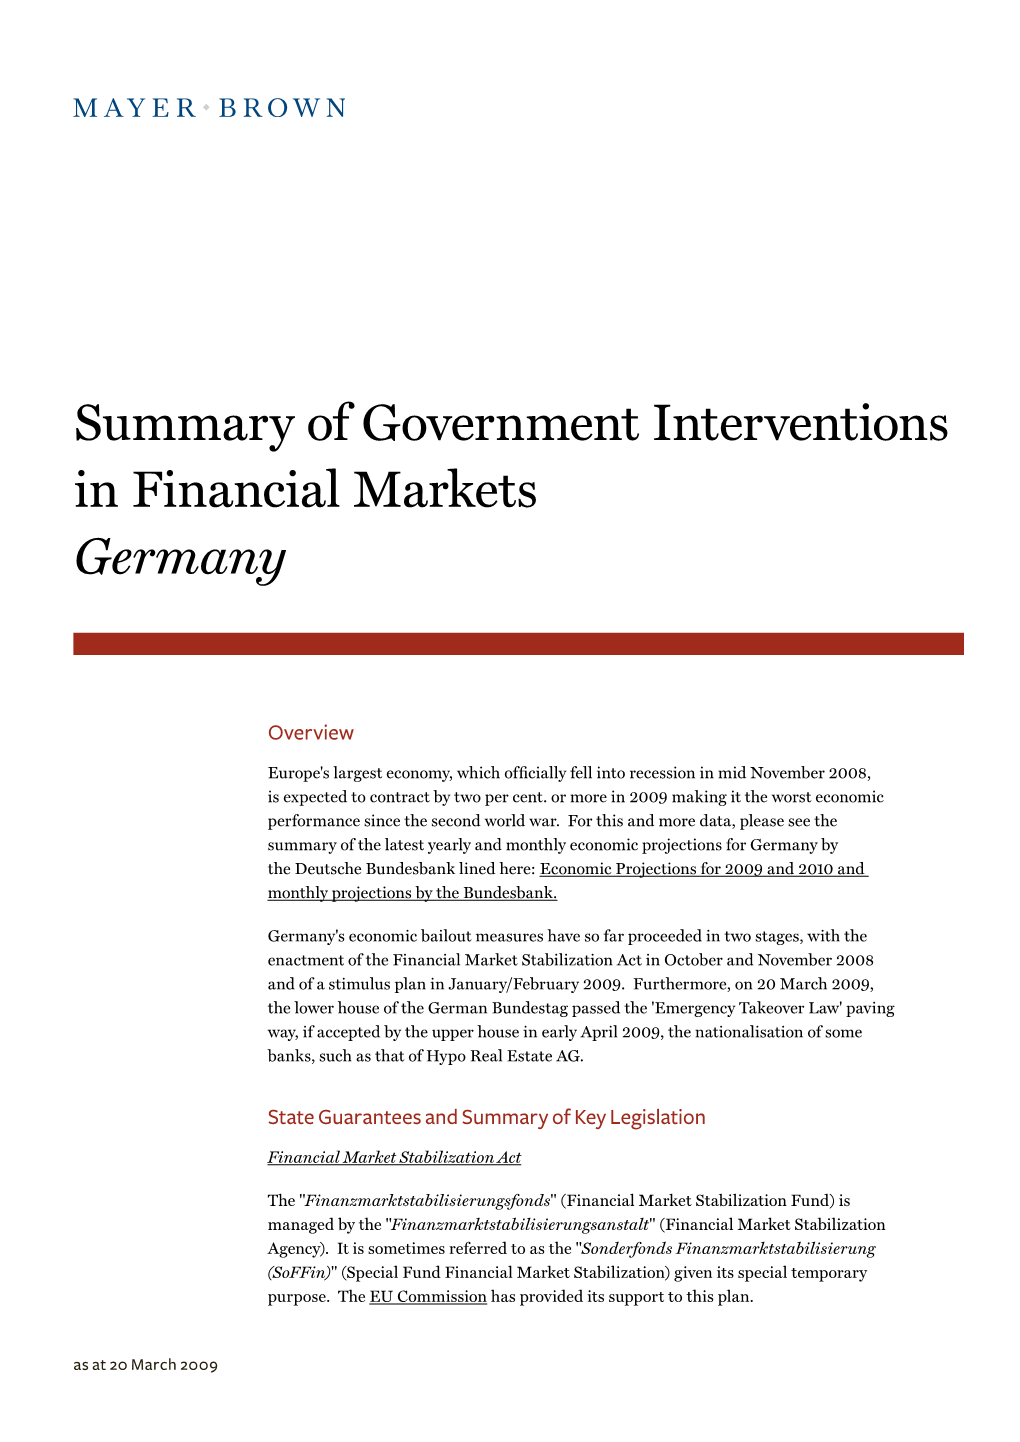 Summary of Government Interventions in Financial Markets Germany